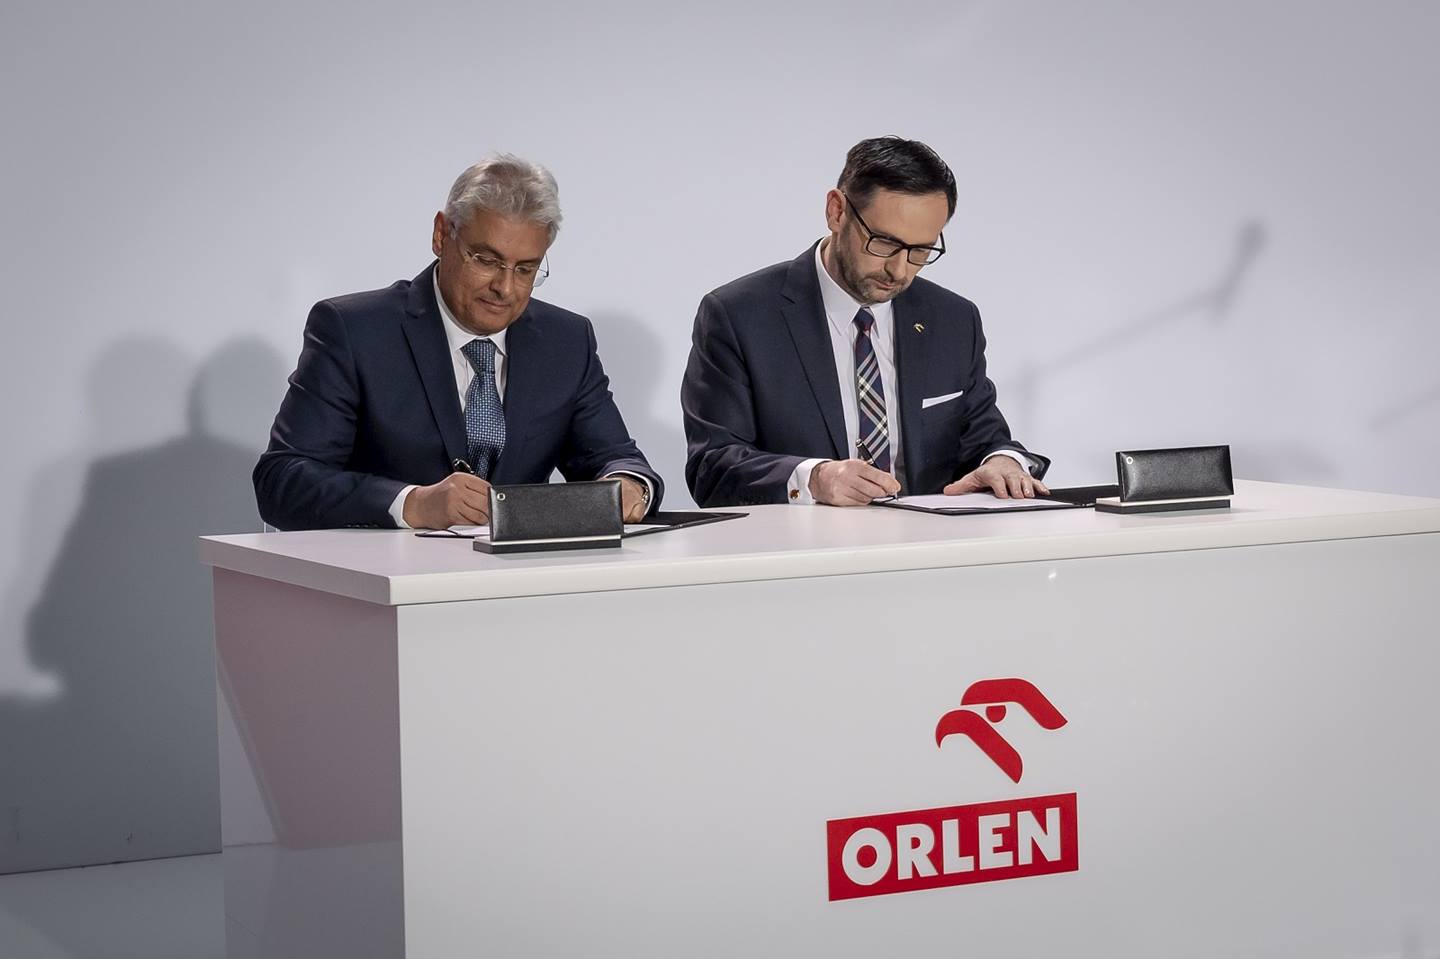 Three transactions completed with Poland’s PKN ORLEN